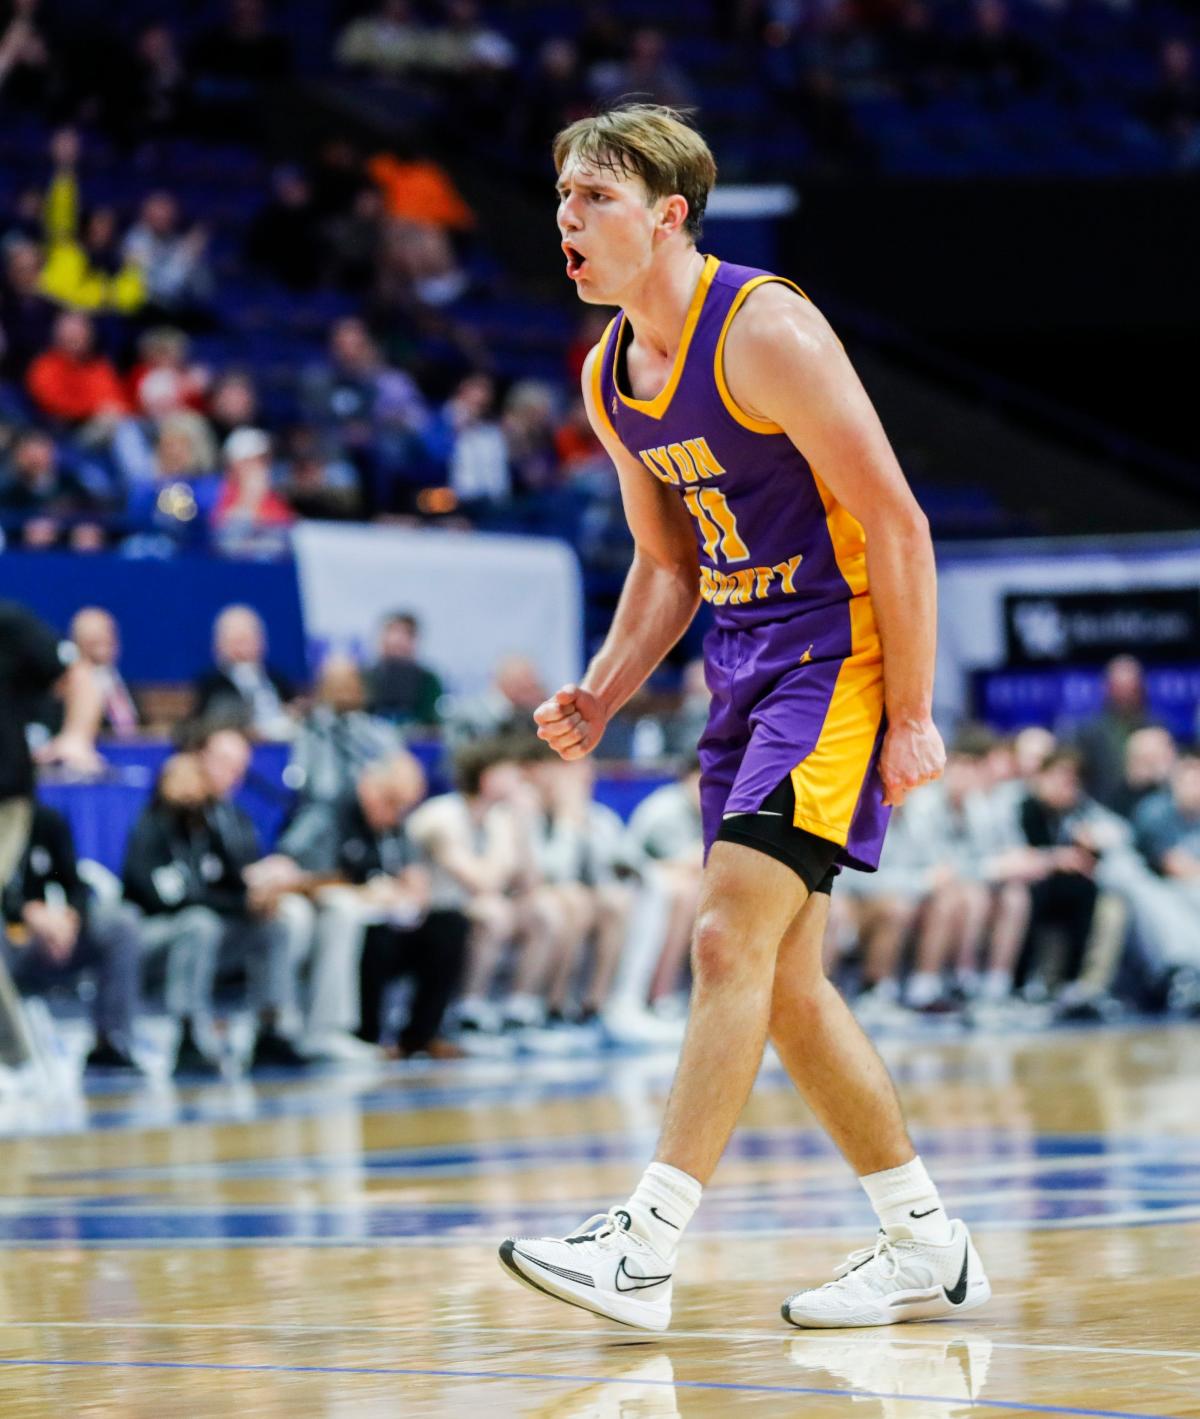 Reed Sheppard's Success is no Surprise to Lyon County Standout